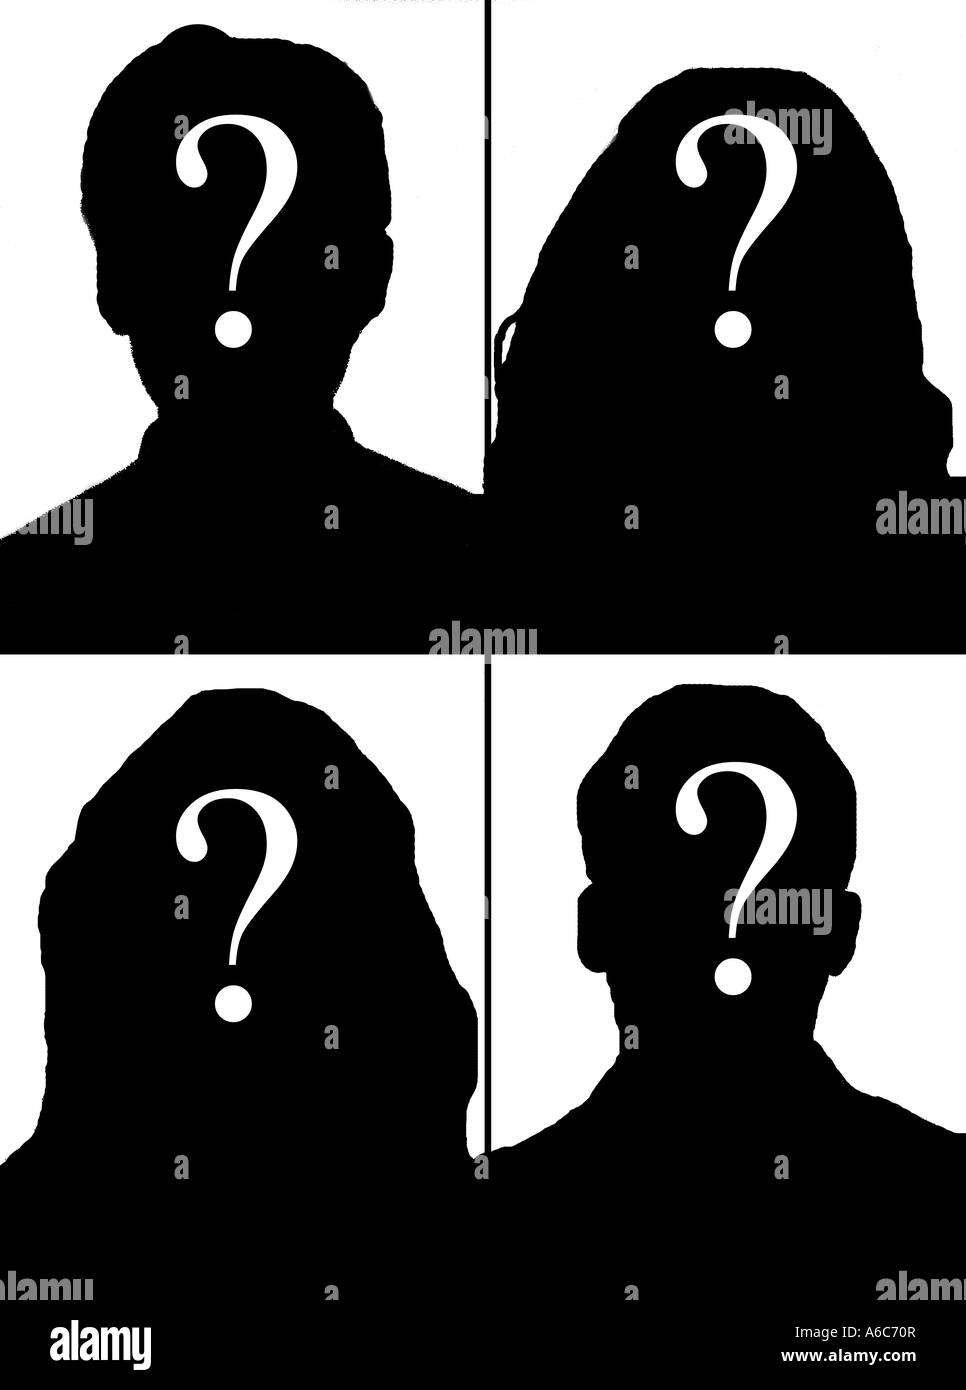 silhouette of male and female heads with question mark composited over faces Stock Photo